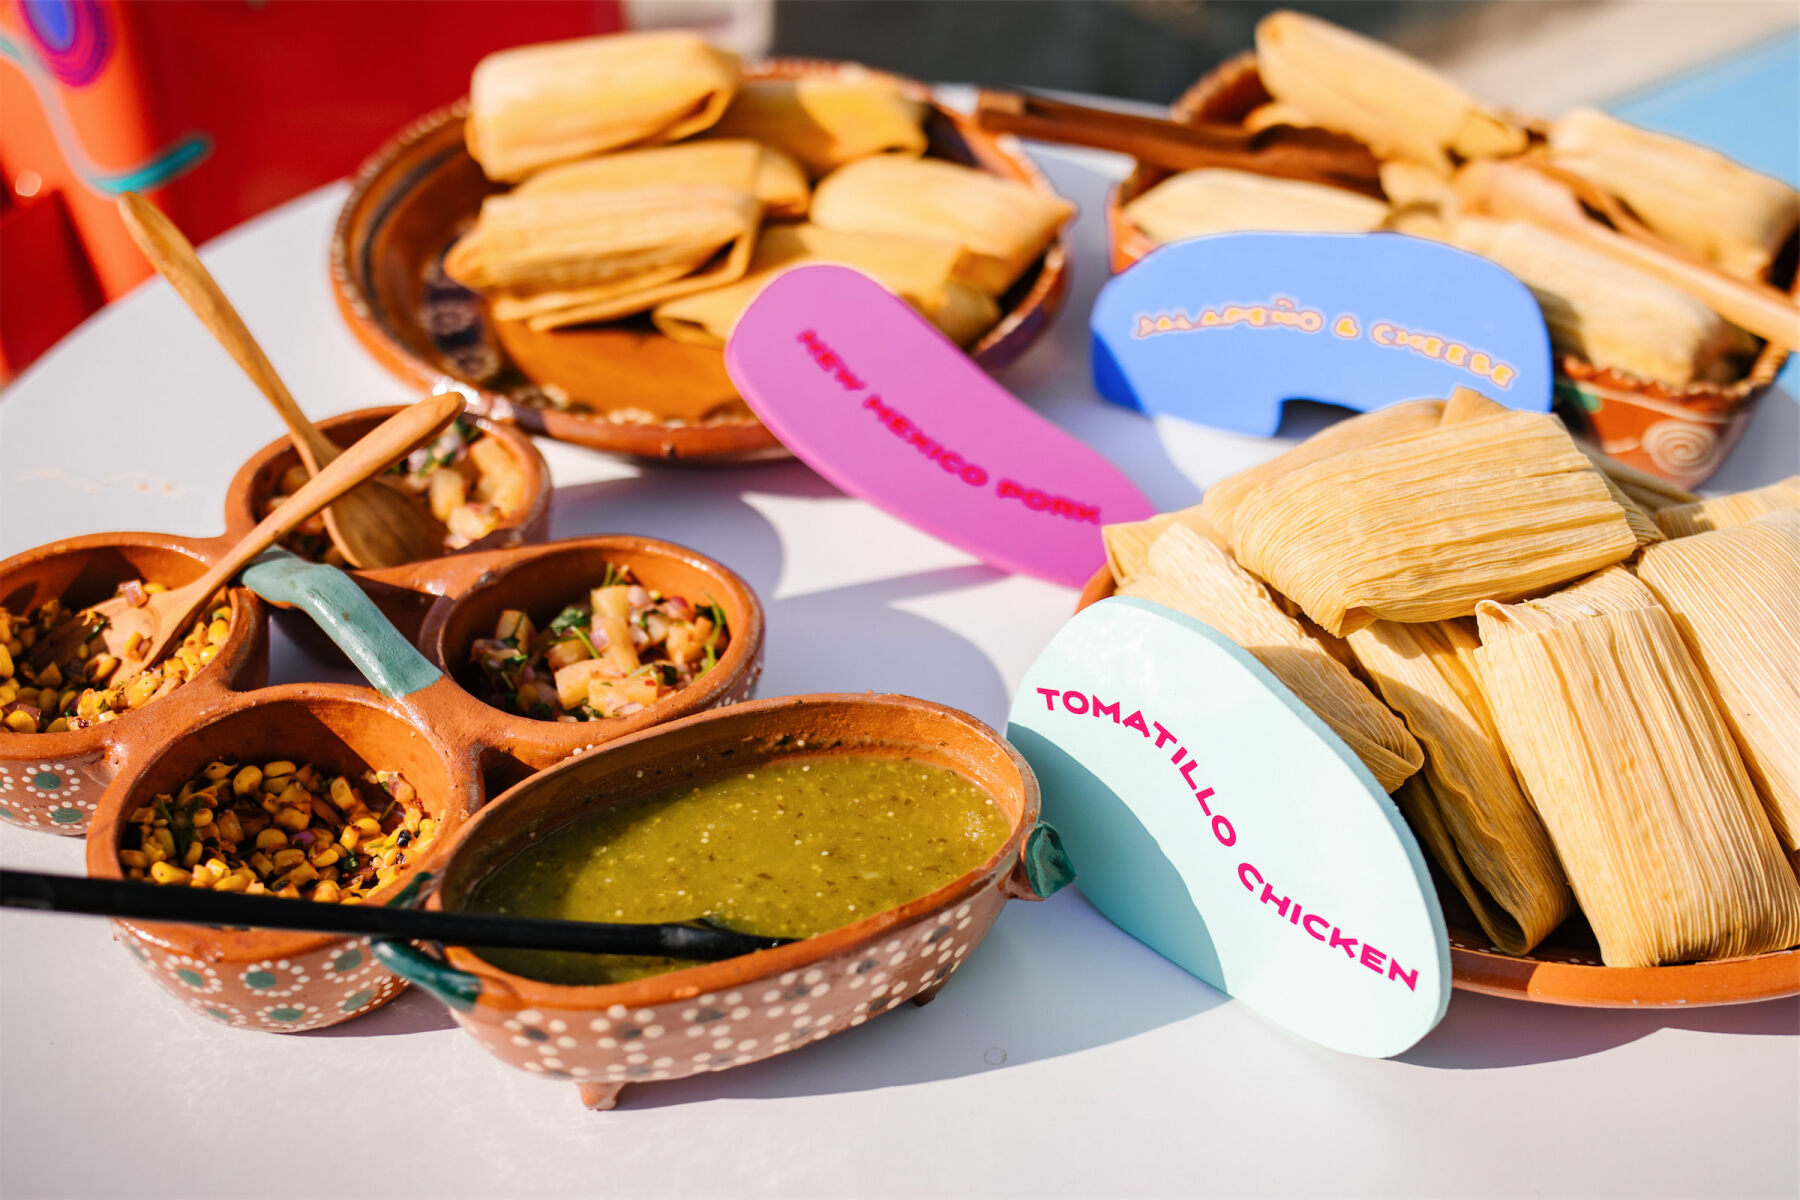 Tamales and salsa were also served at this vibrant, outdoor wedding reception.